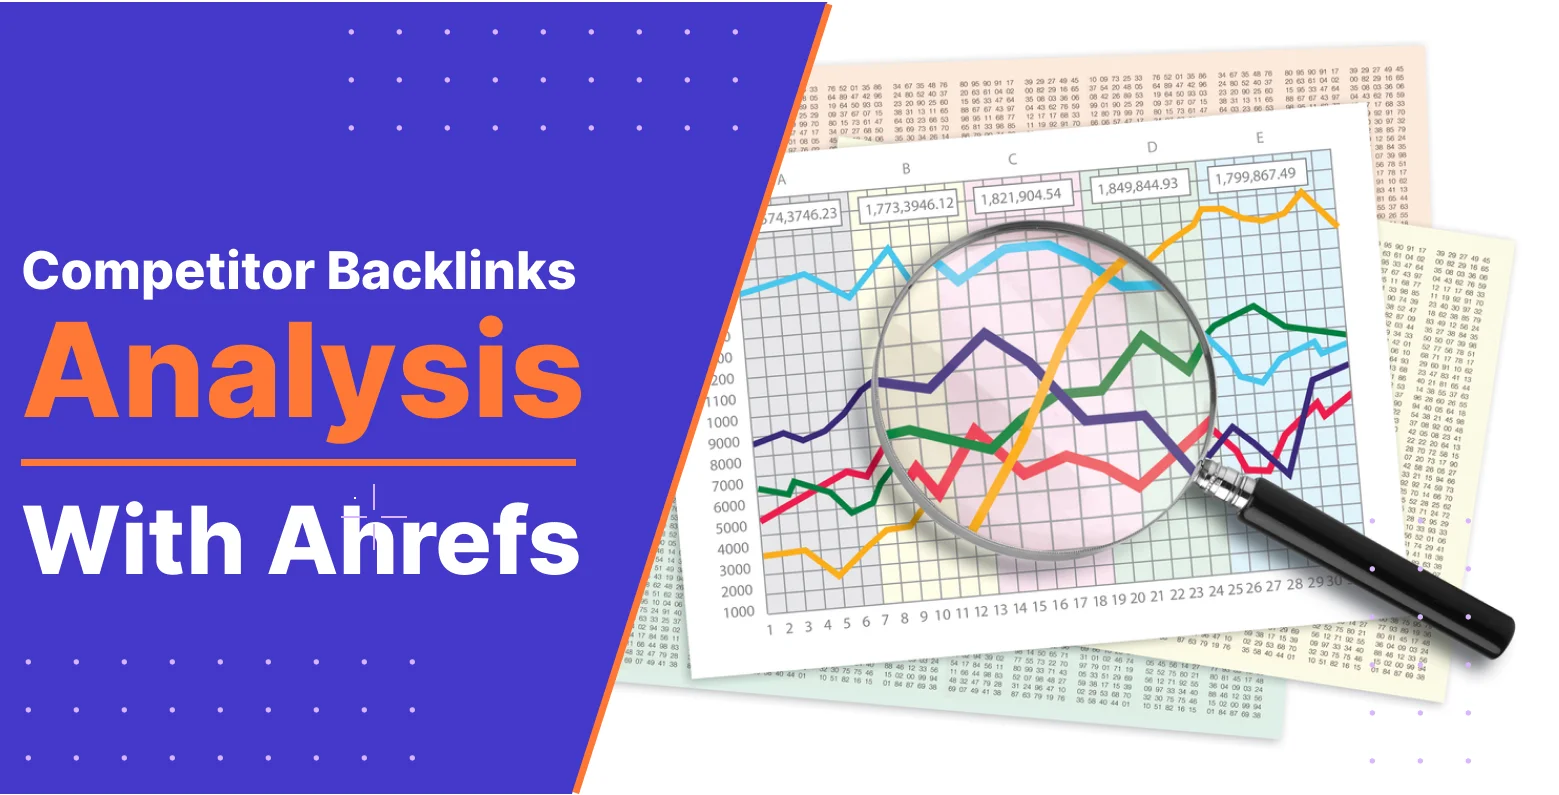 Competitor Backlinks Analysis with ahrefs